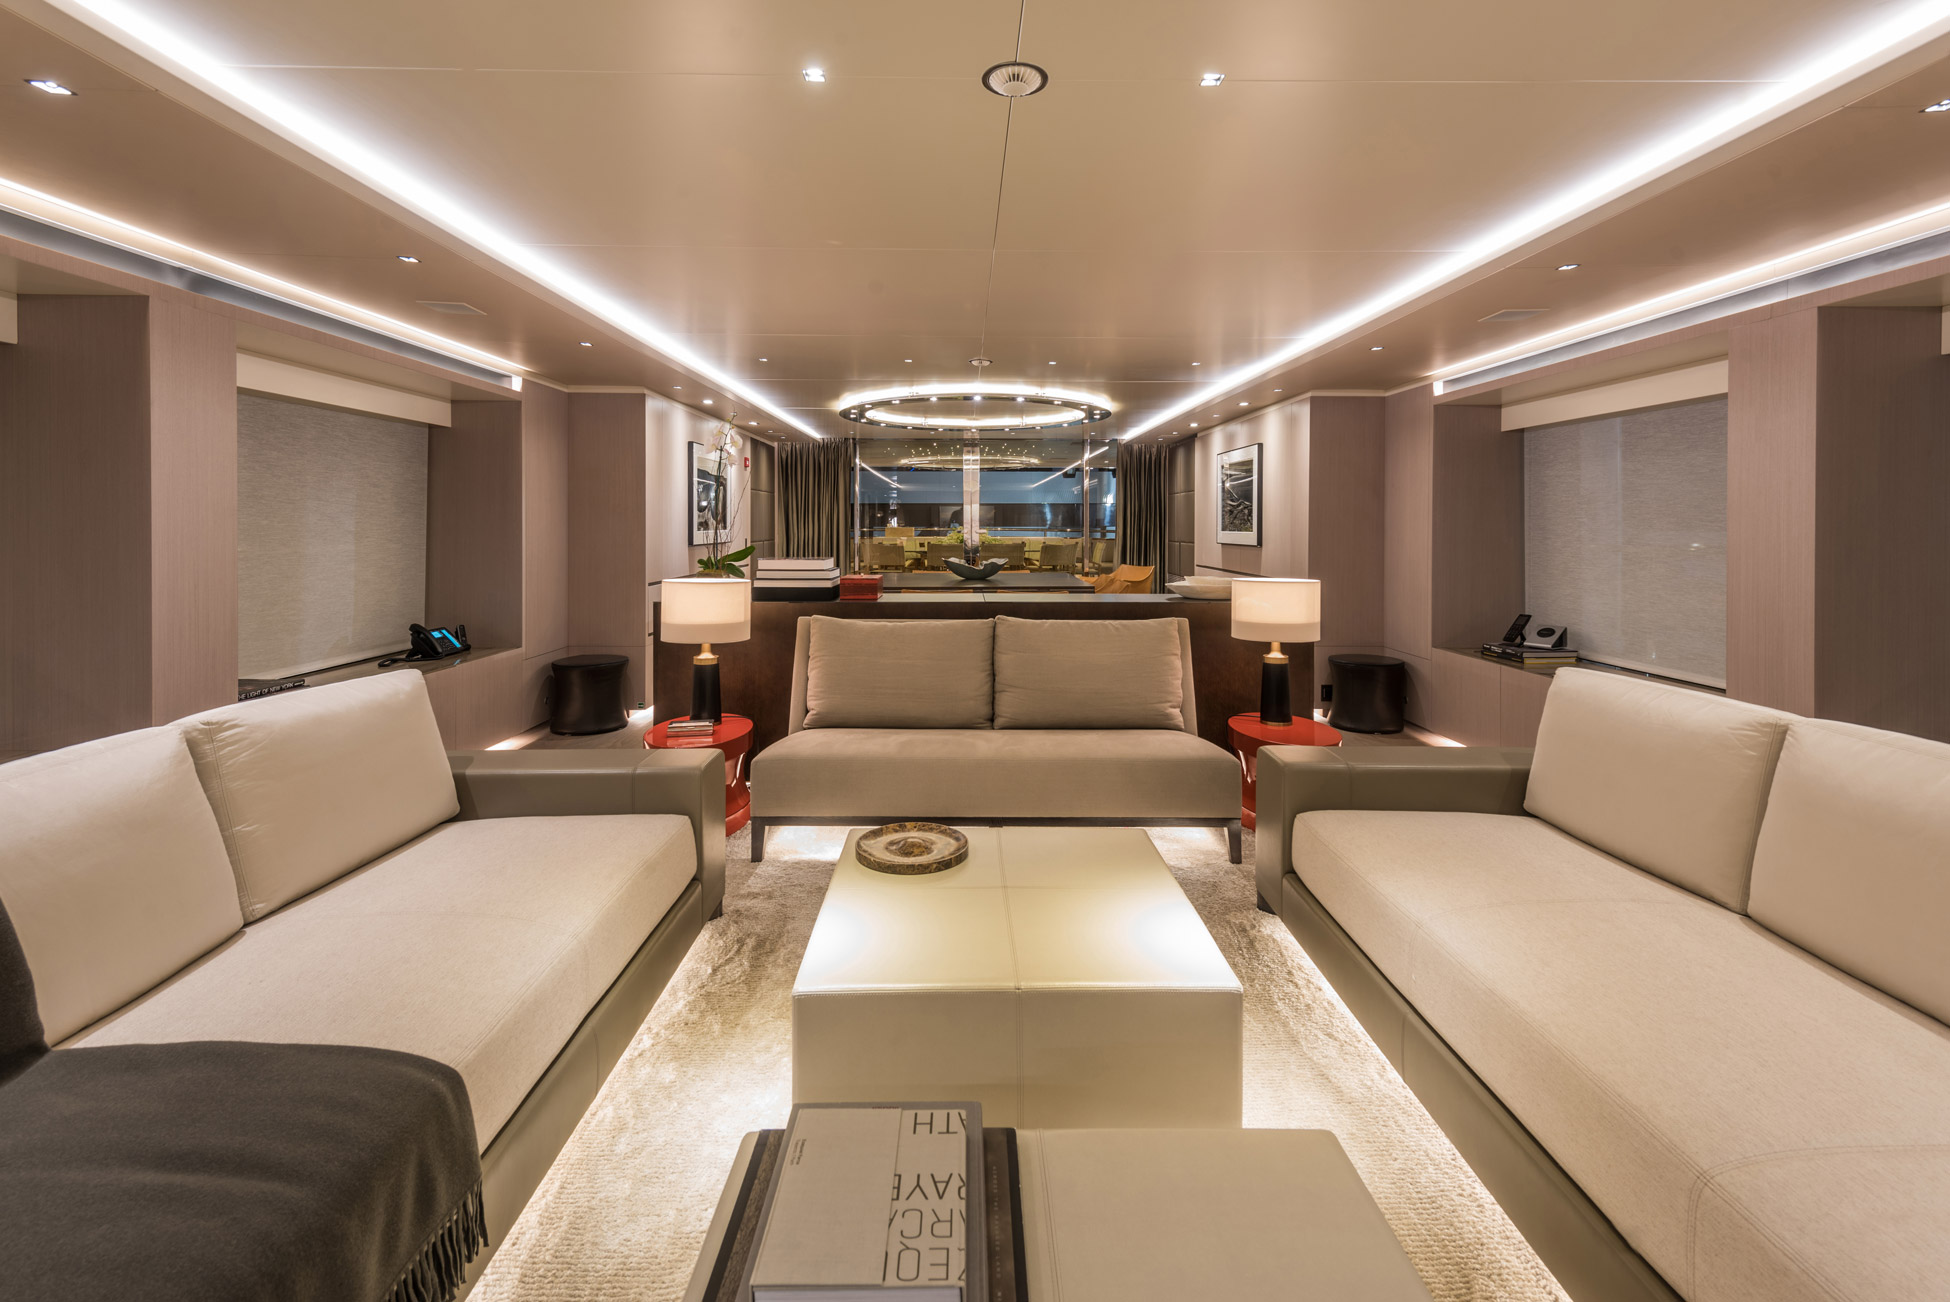 Main Deck Saloon Interior With Dining Area Aft